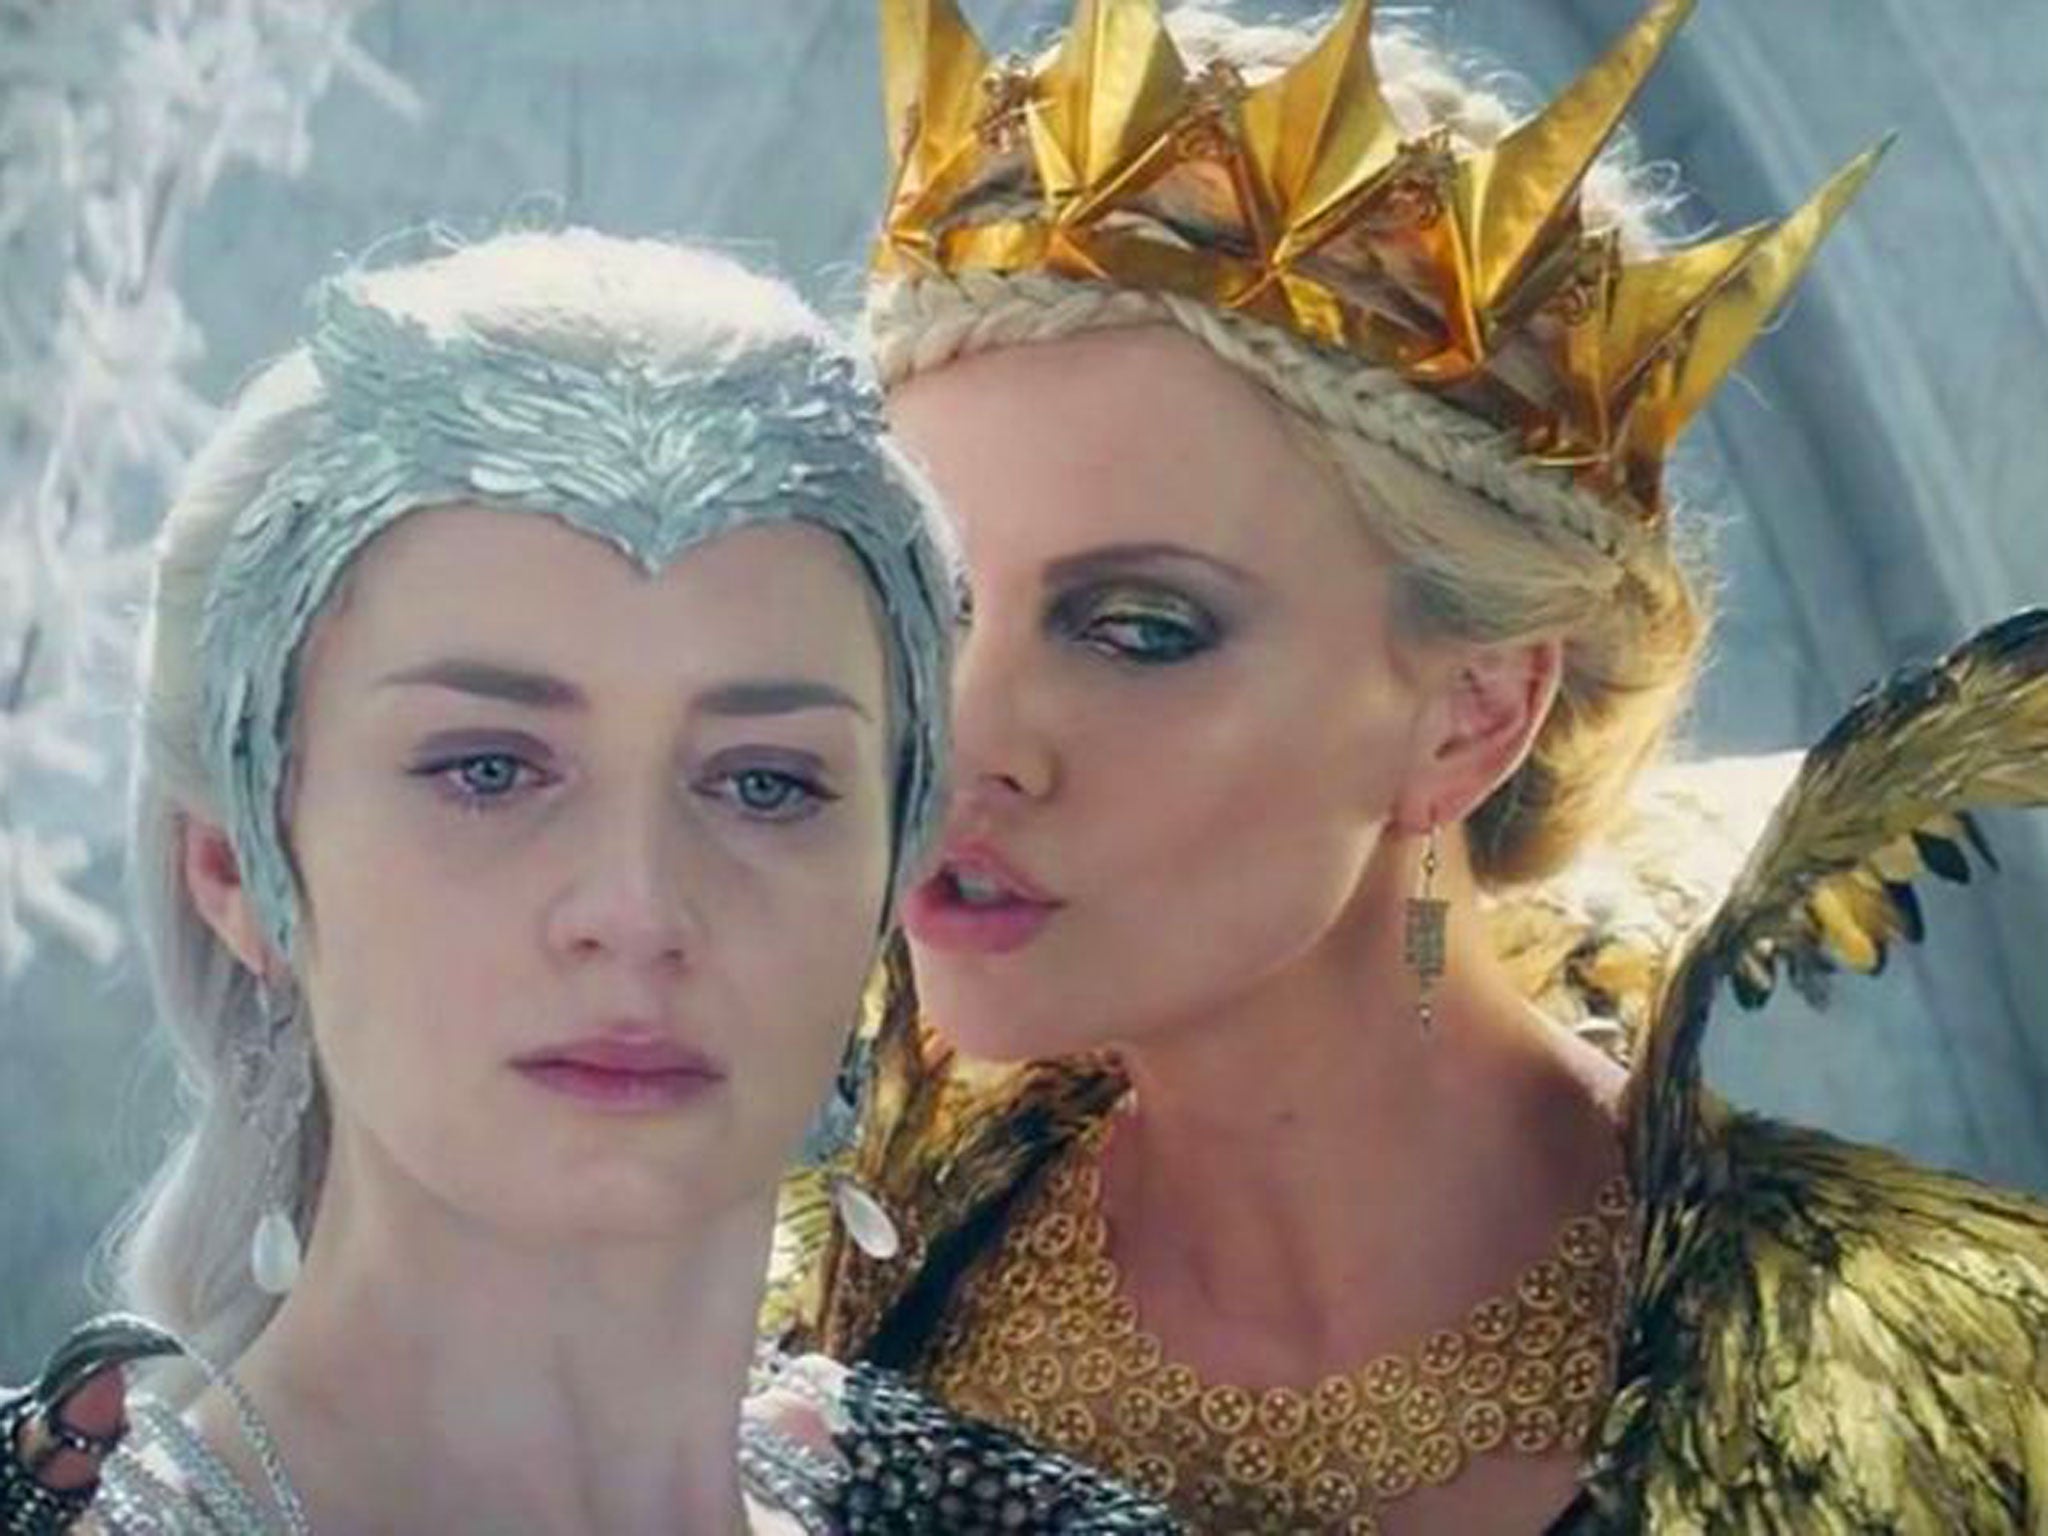 Emily Blunt stars as Freya, The Ice Queen and Charlize Theron plays her evil sister Ravenna